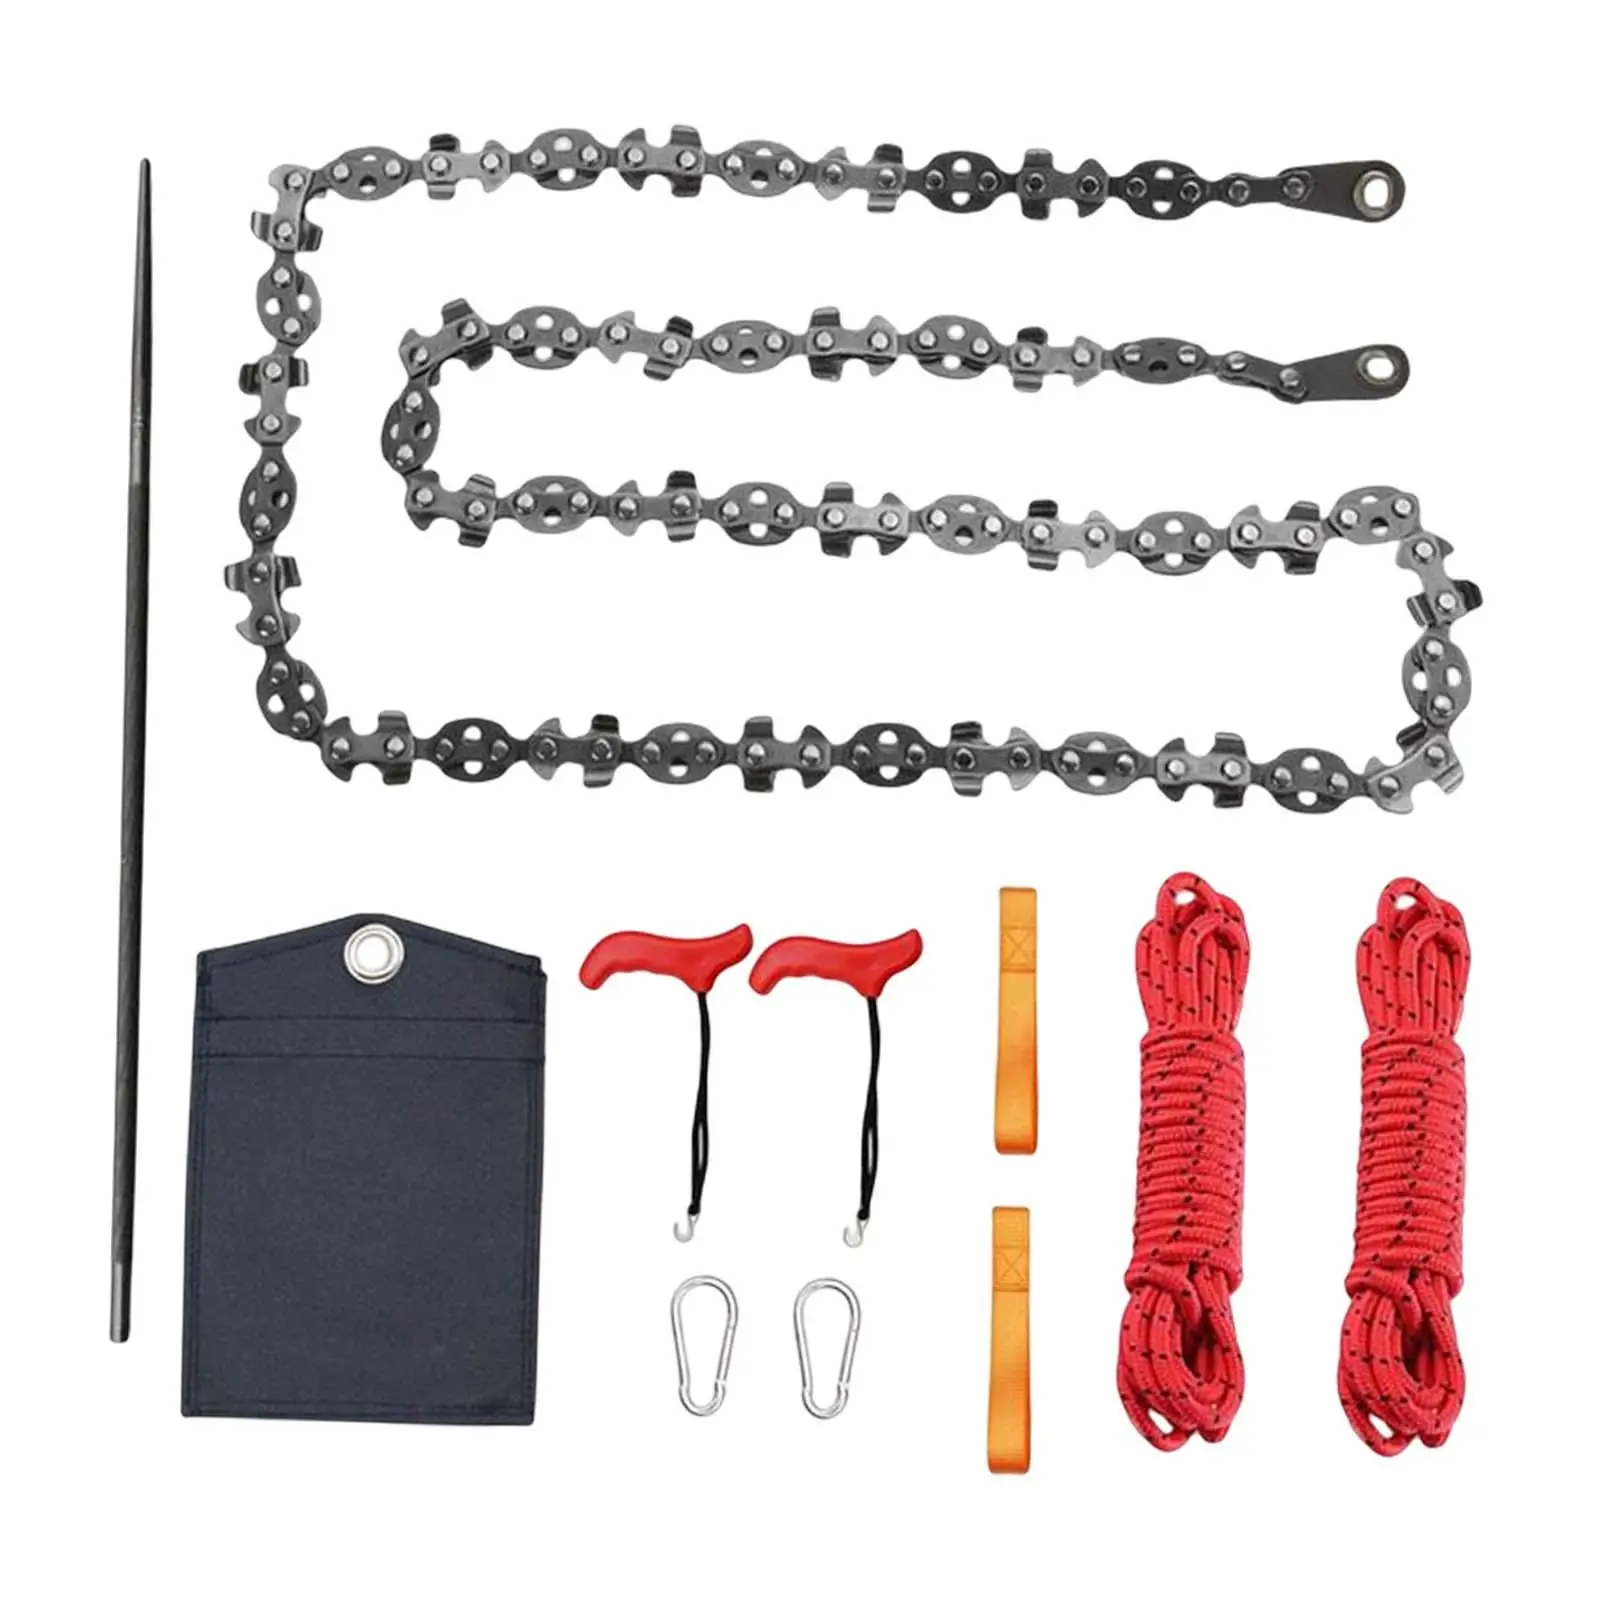 Lightweight Wire Saw Emergency Saw Zipper Saw Hand Chain Saw for Emergency Wood Cutting Gardening Camping Outdoor